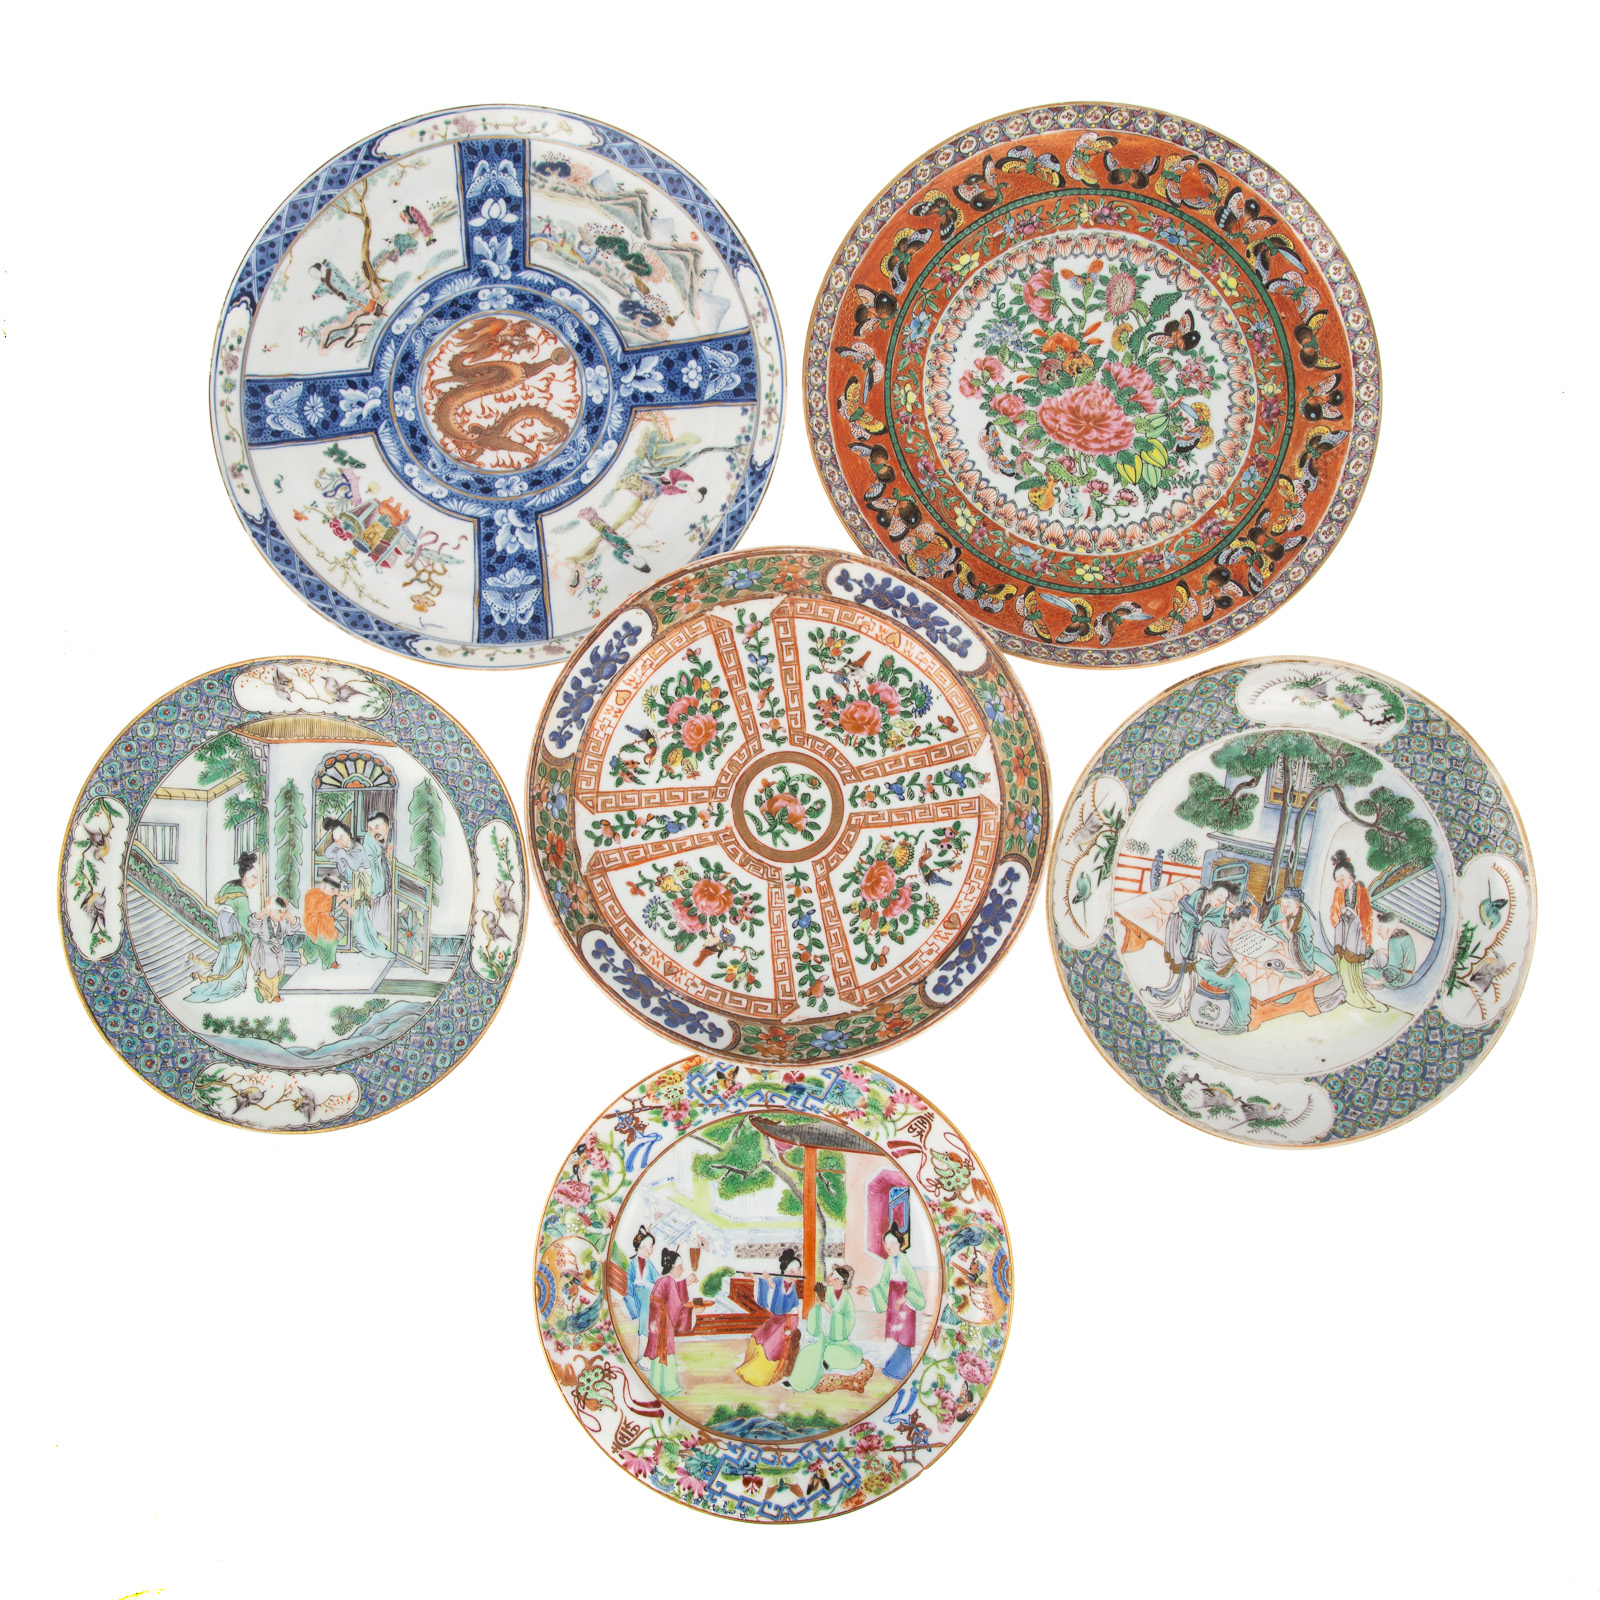 SIX CHINESE EXPORT PLATES Daoguang 36ad05